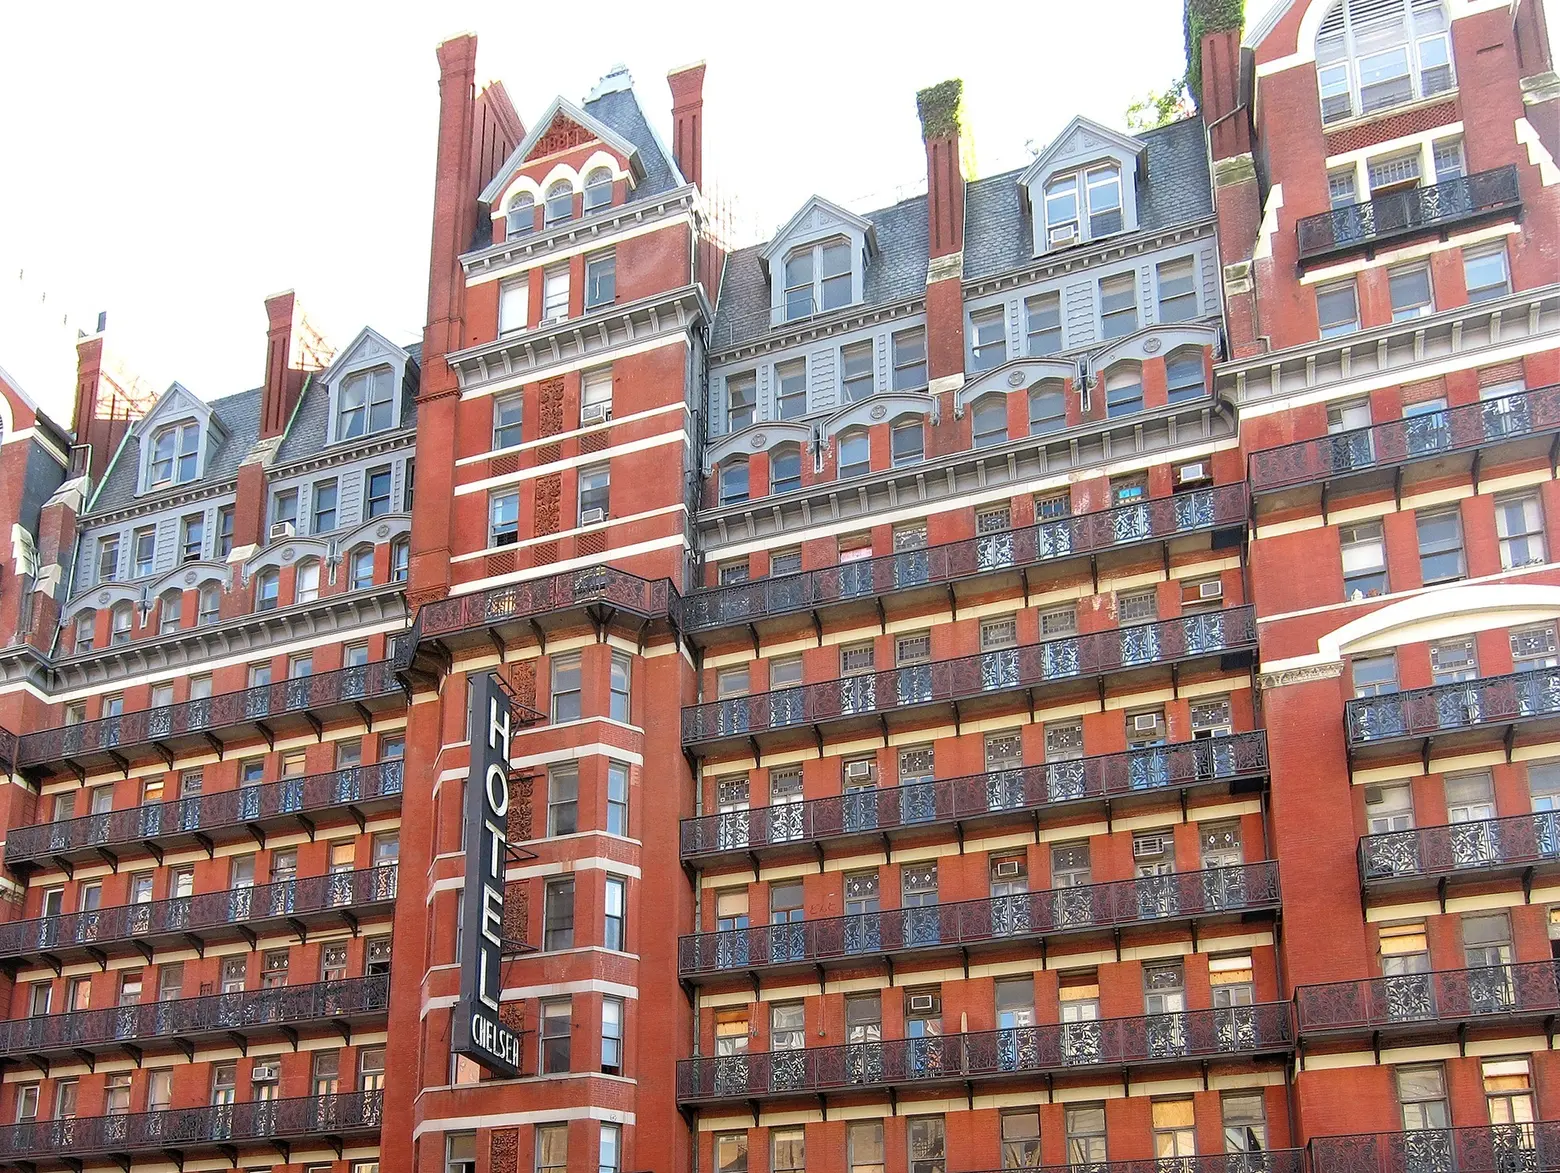 City alleges Chelsea Hotel owners harassed tenants during renovation